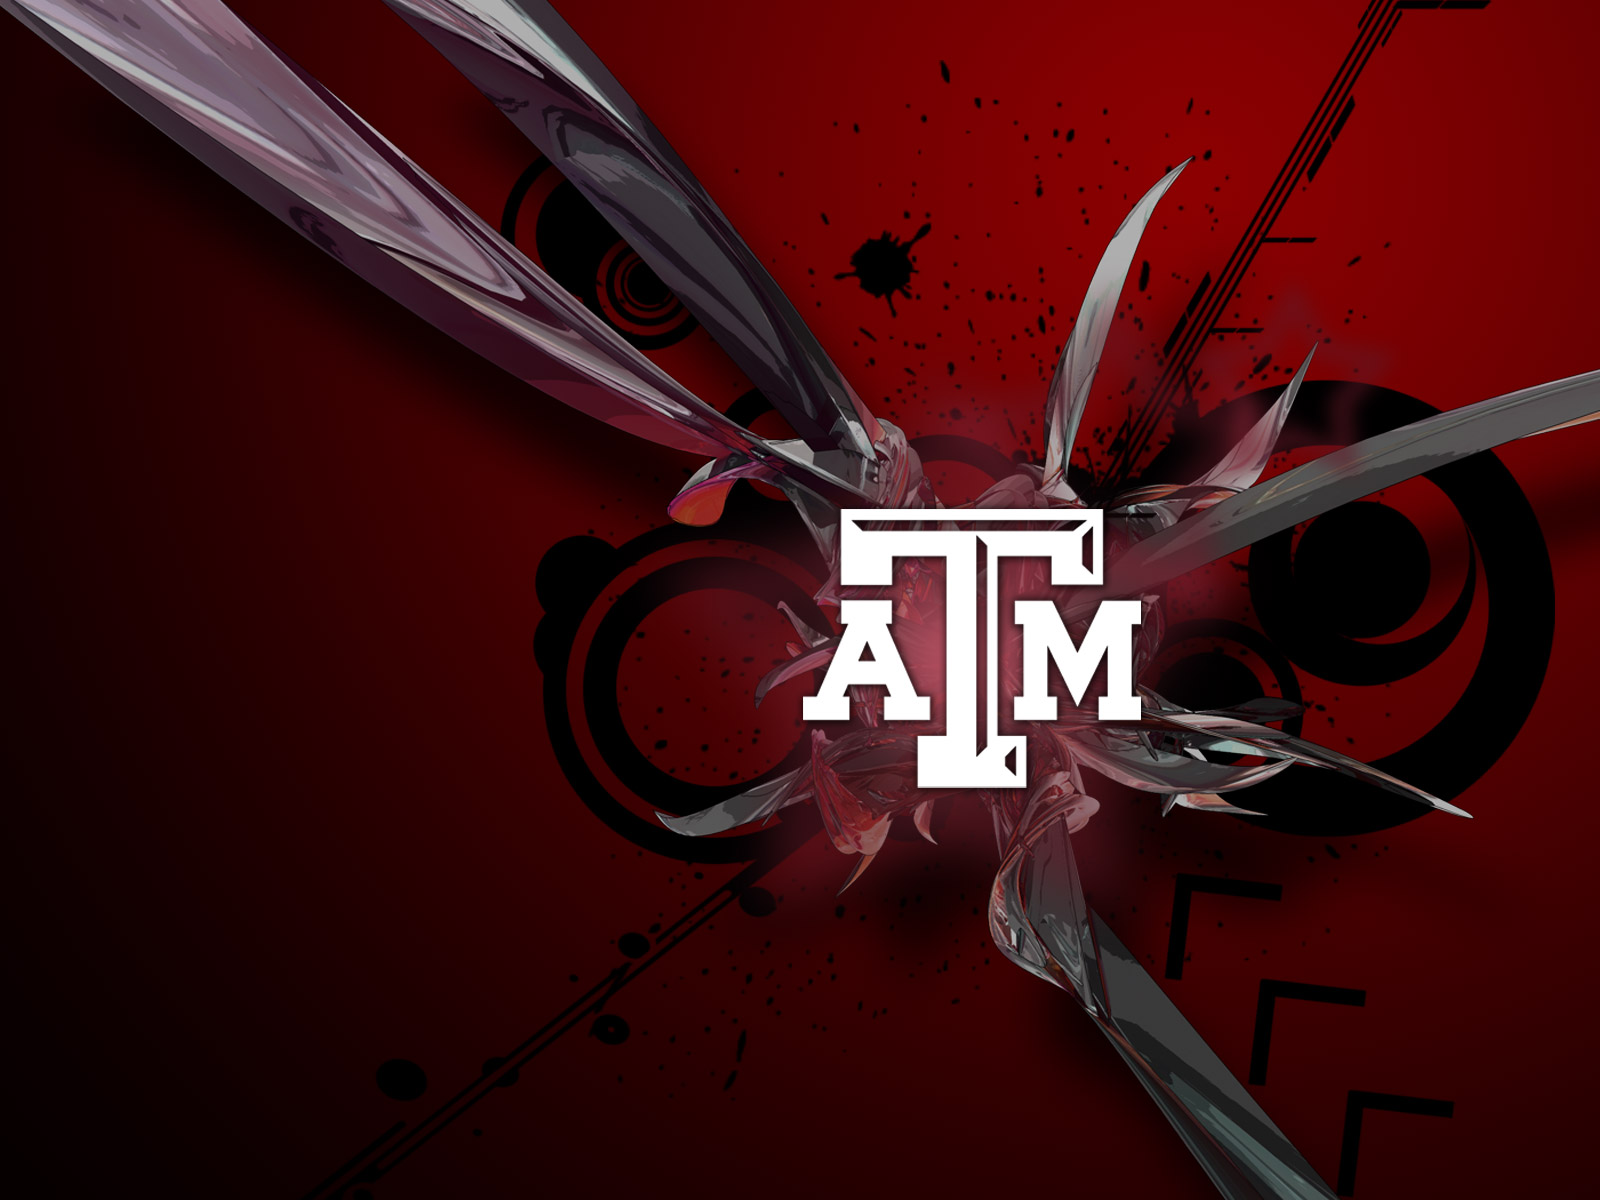 Texas AM Downloads for Every Aggies Fan